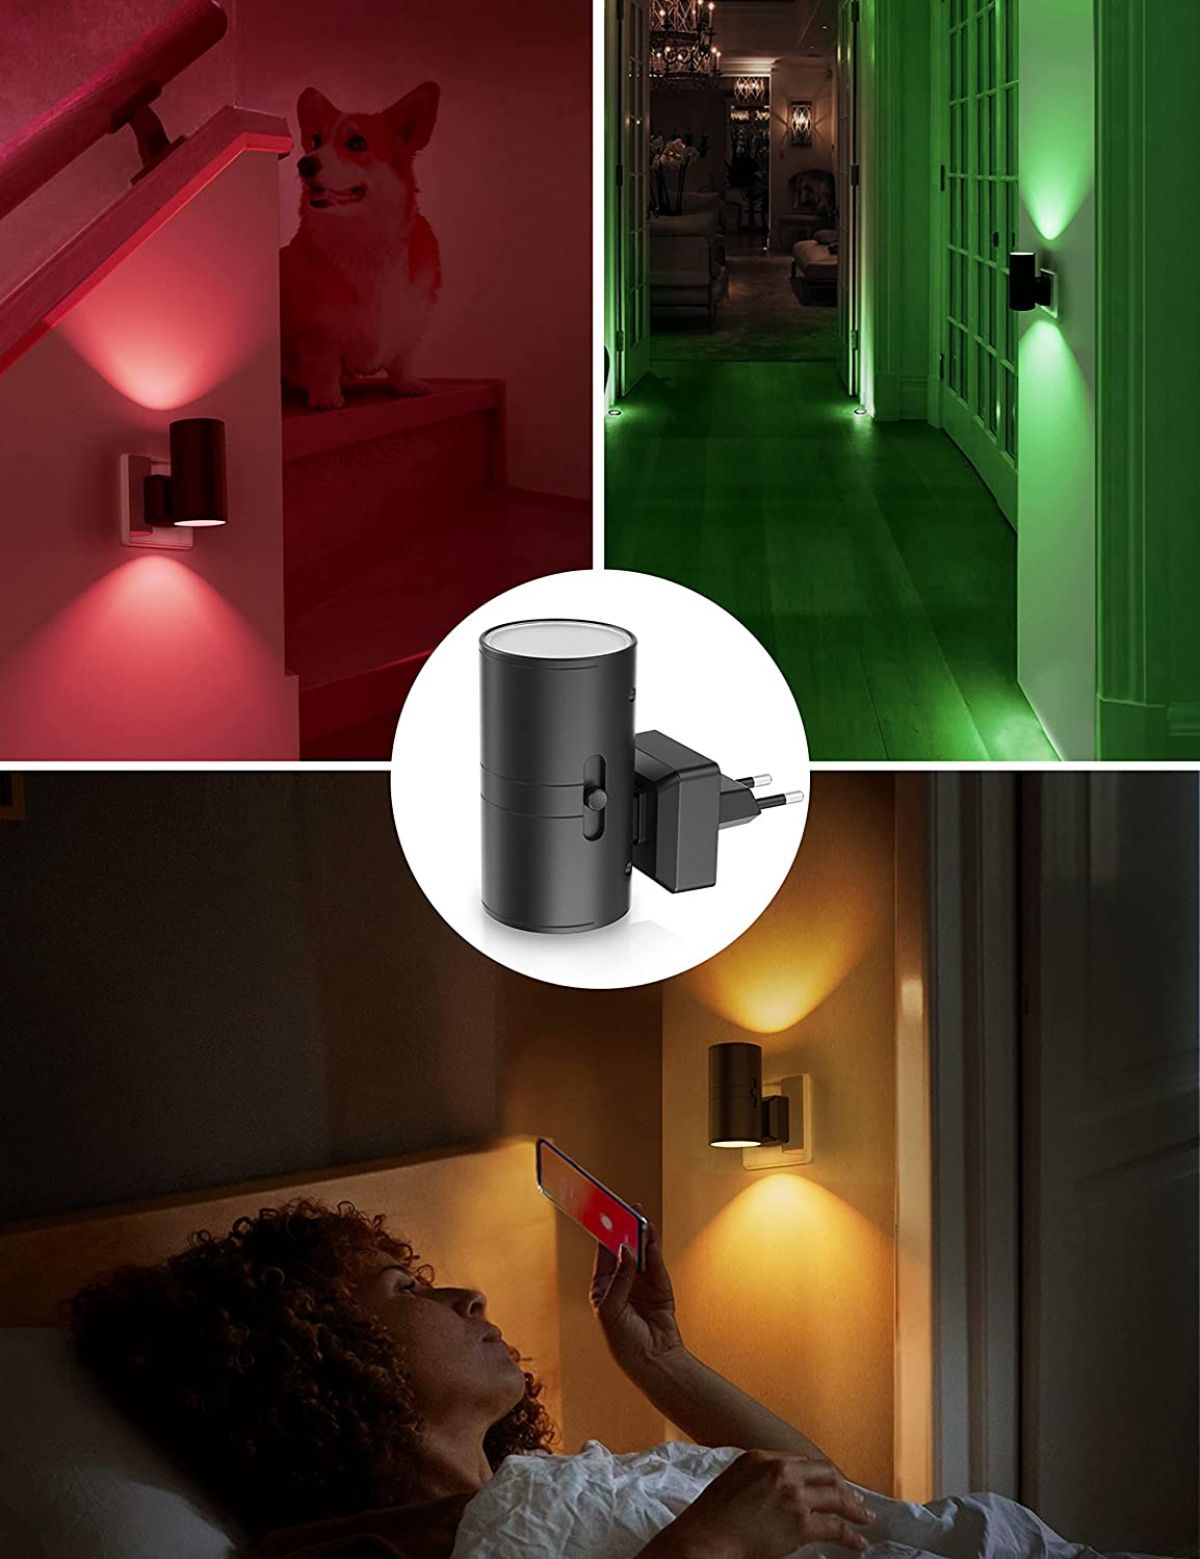 LED night light socket dimmable color changing